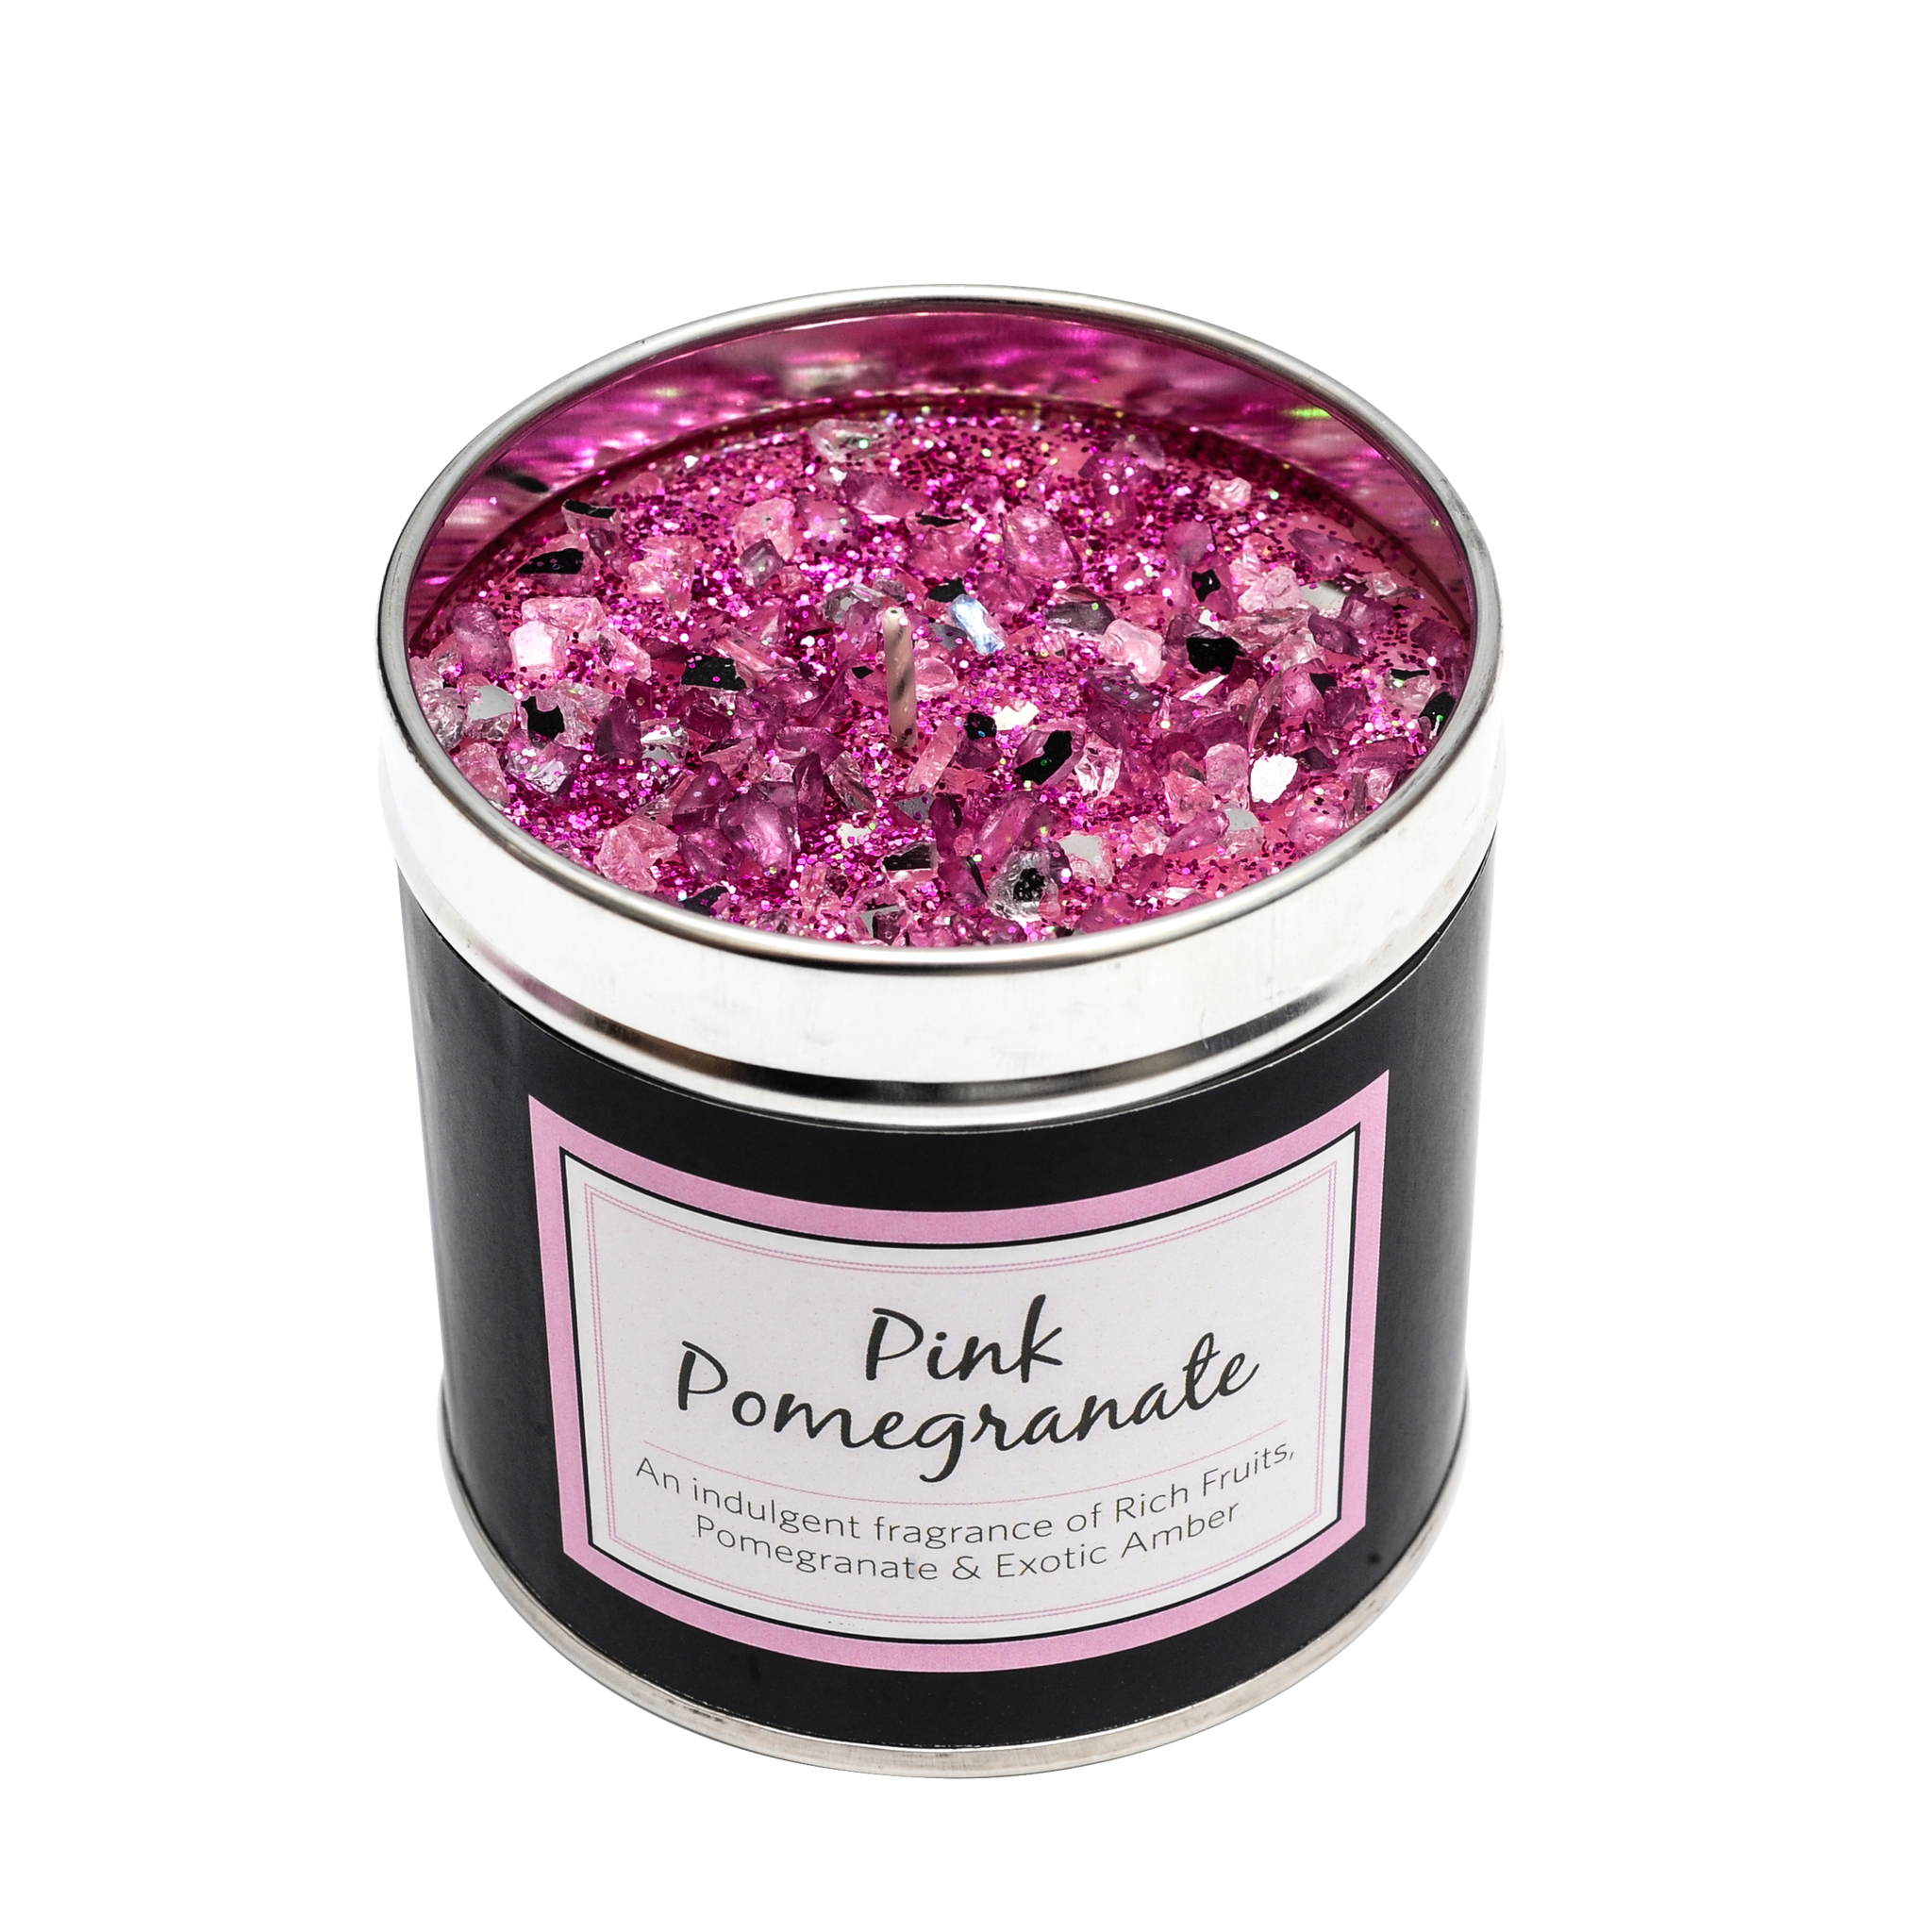 Seriously Scented Candle in a Tin - Pink Pomegranate (NEW)-Scented Products-Best Kept Secrets-Thursford Enterprises Ltd.